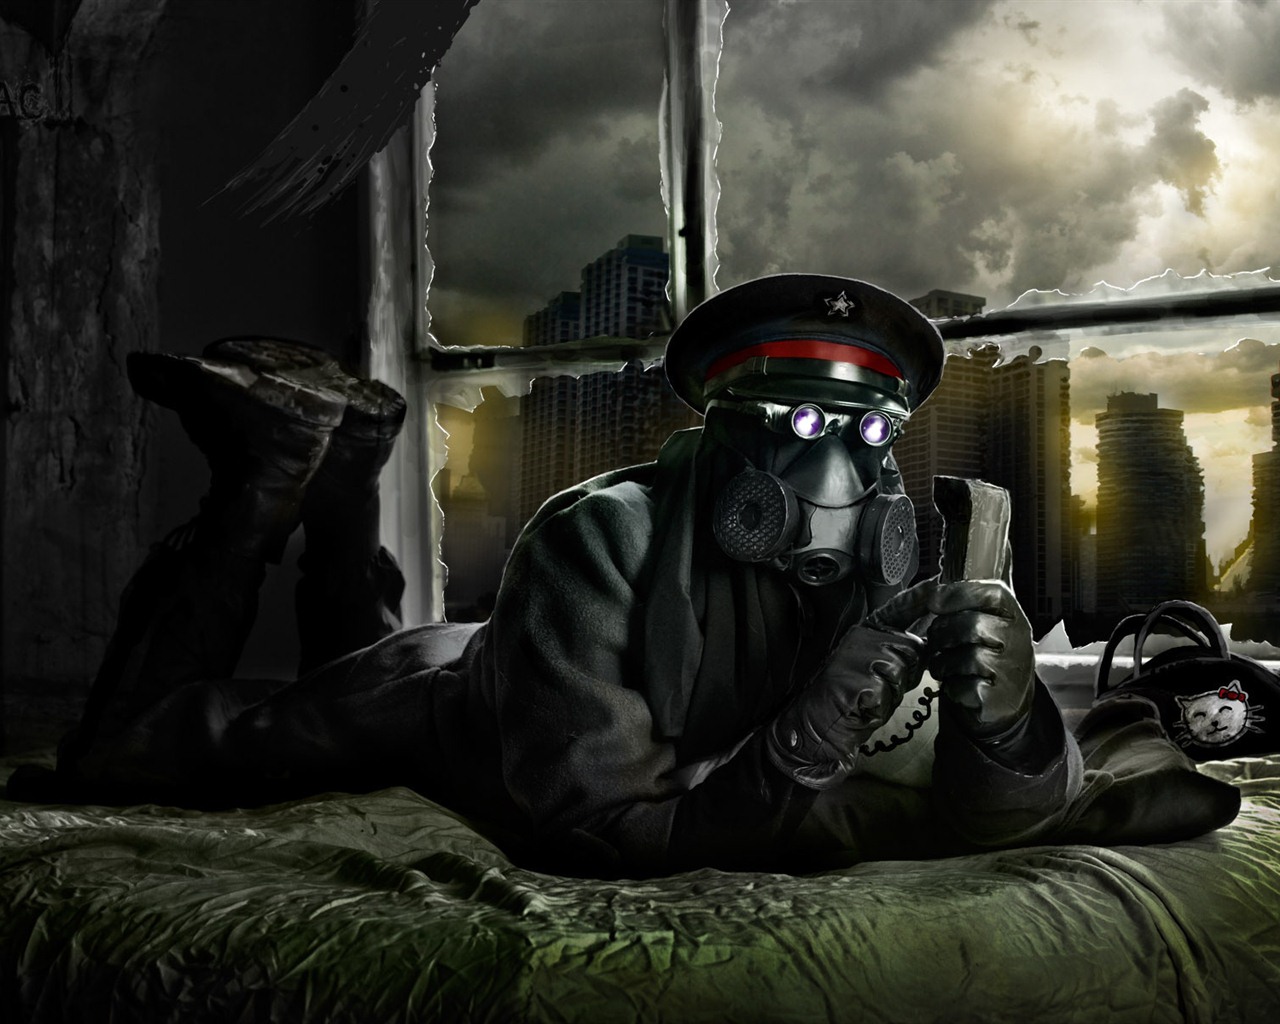 Romantically Apocalyptic creative painting wallpapers (2) #14 - 1280x1024